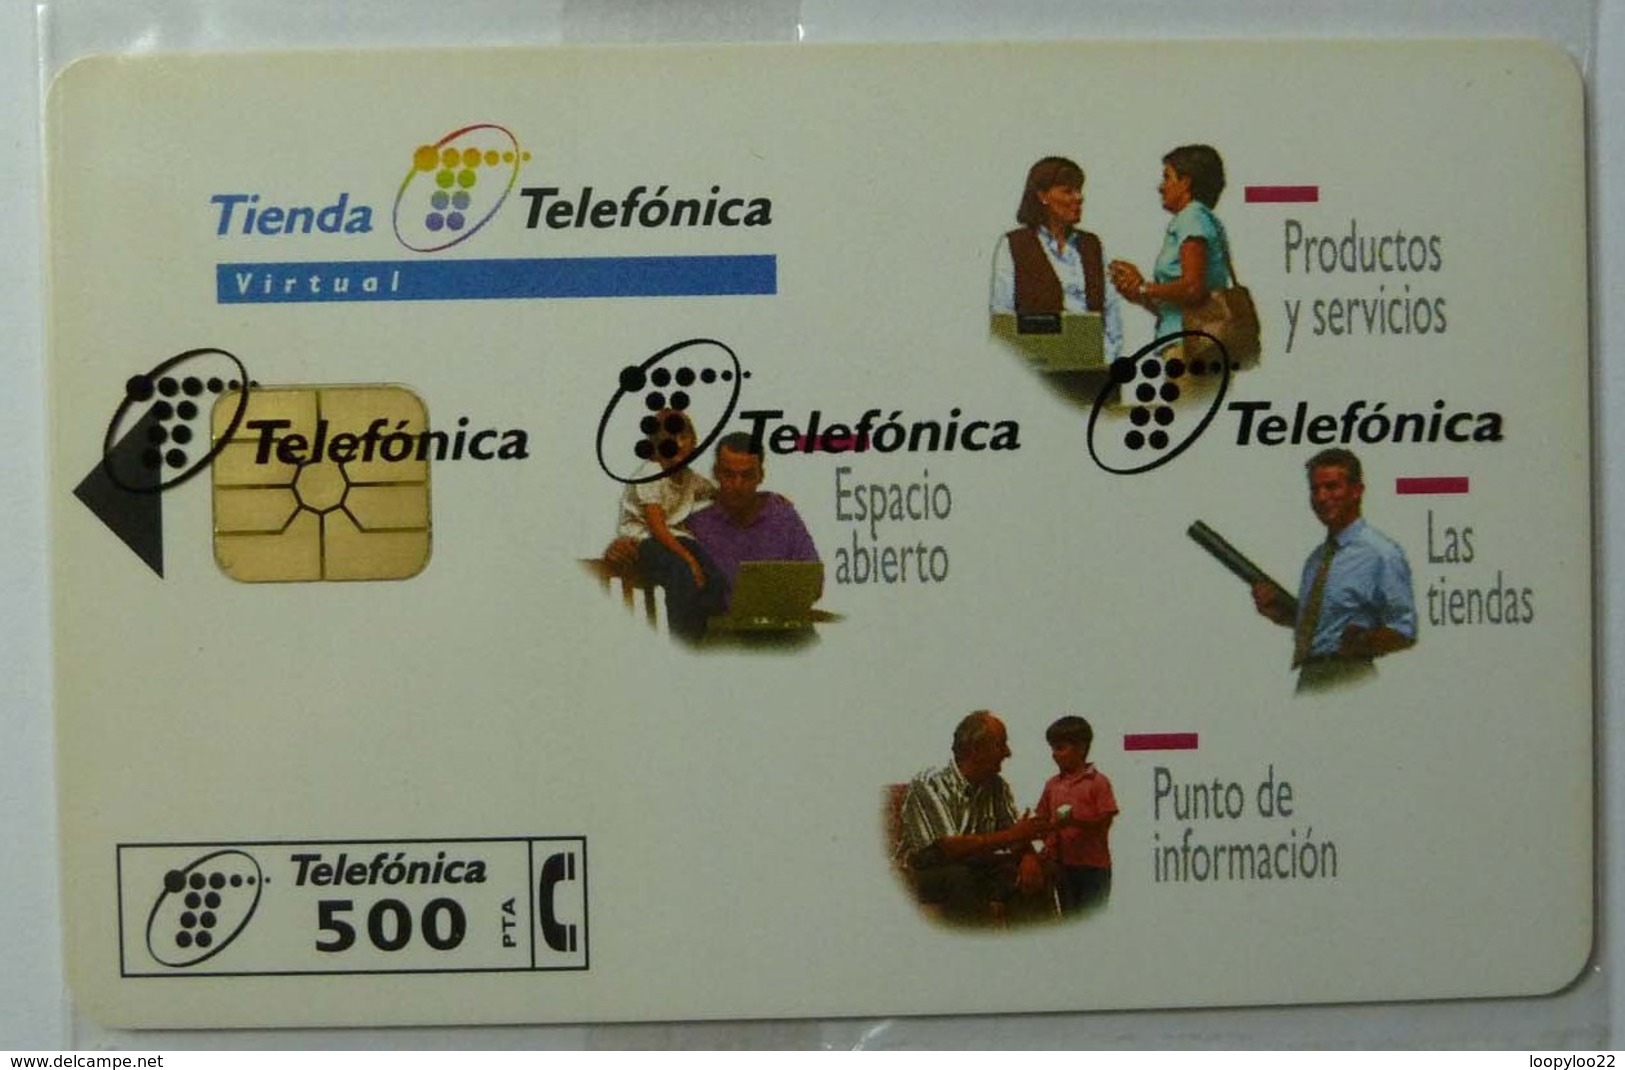 SPAIN - Chip - 500 Units - Tienda Telefonica - P-327 - 03/98 - 9000ex - Mint Blister - Private Issues